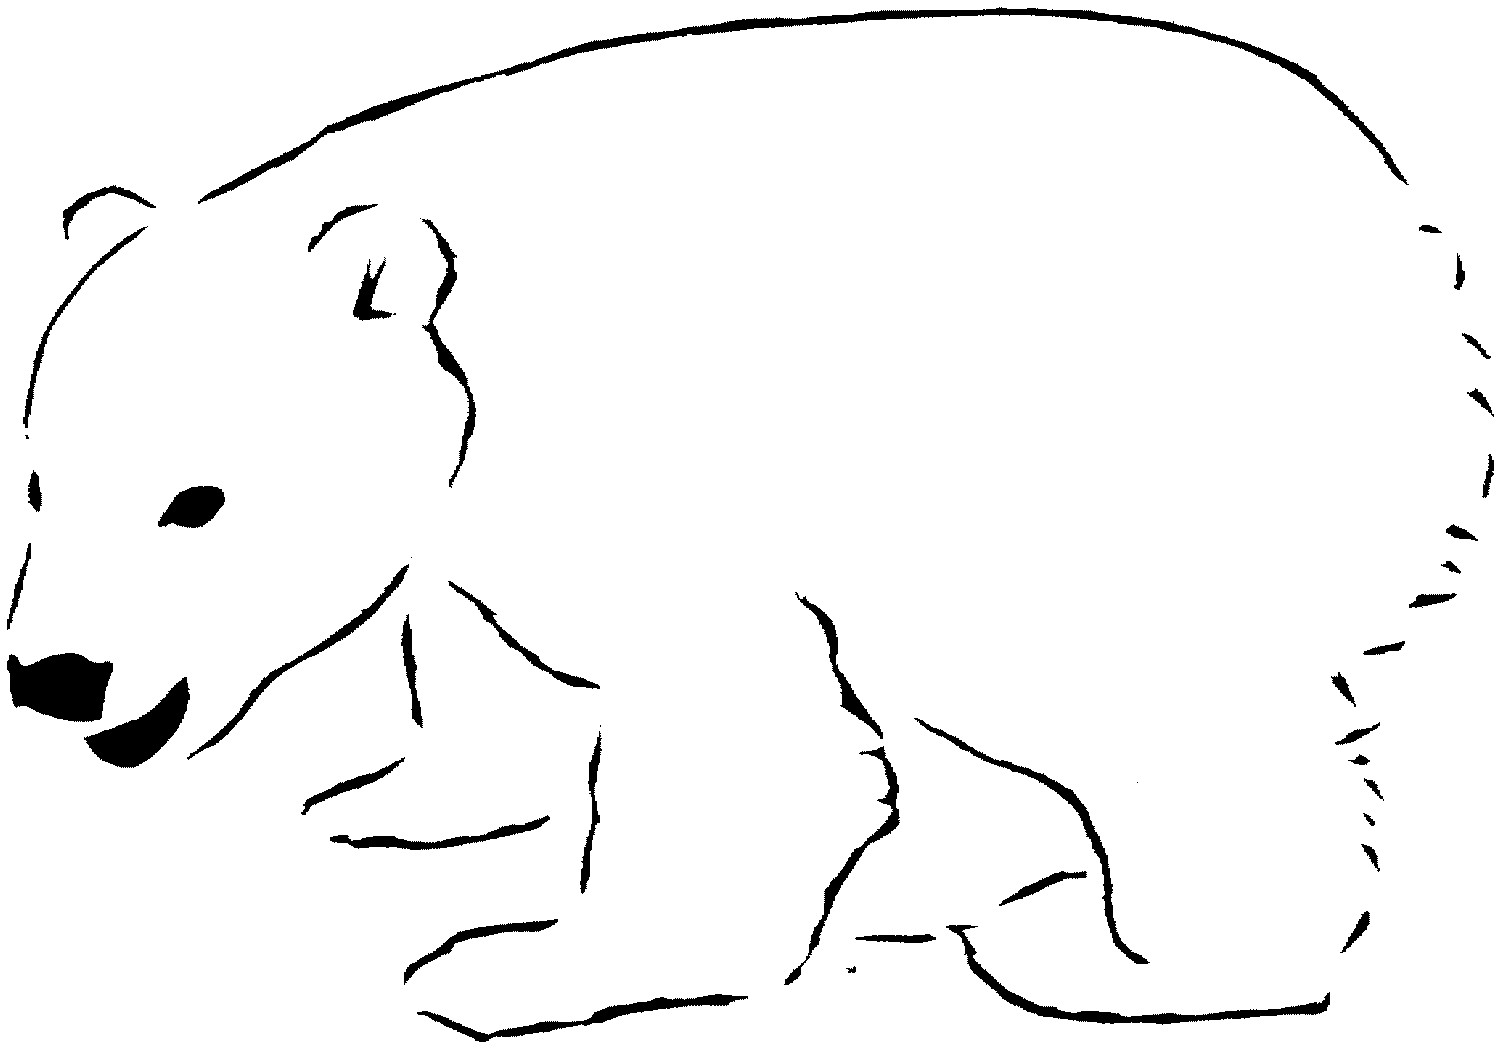 Free Coloring Pages Of Polar Bears
 Free Printable Polar Bear Coloring Pages For Kids